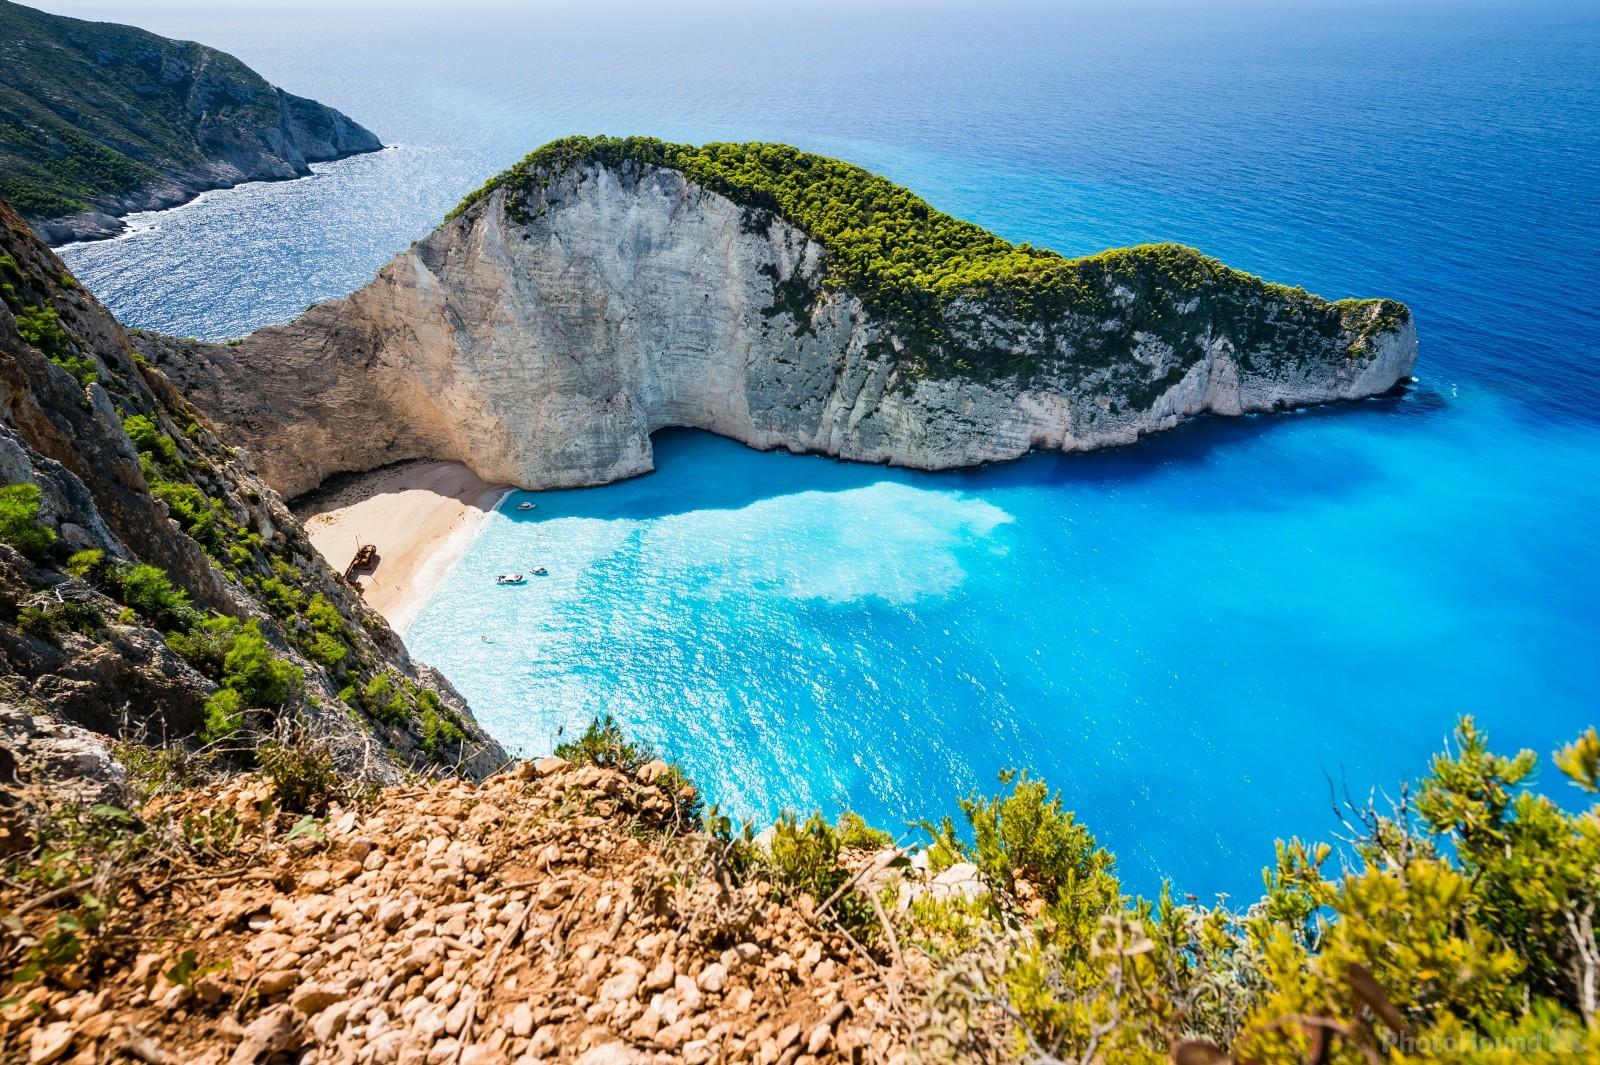 Image of Navagio Beach View by VOJTa Herout | 1004841